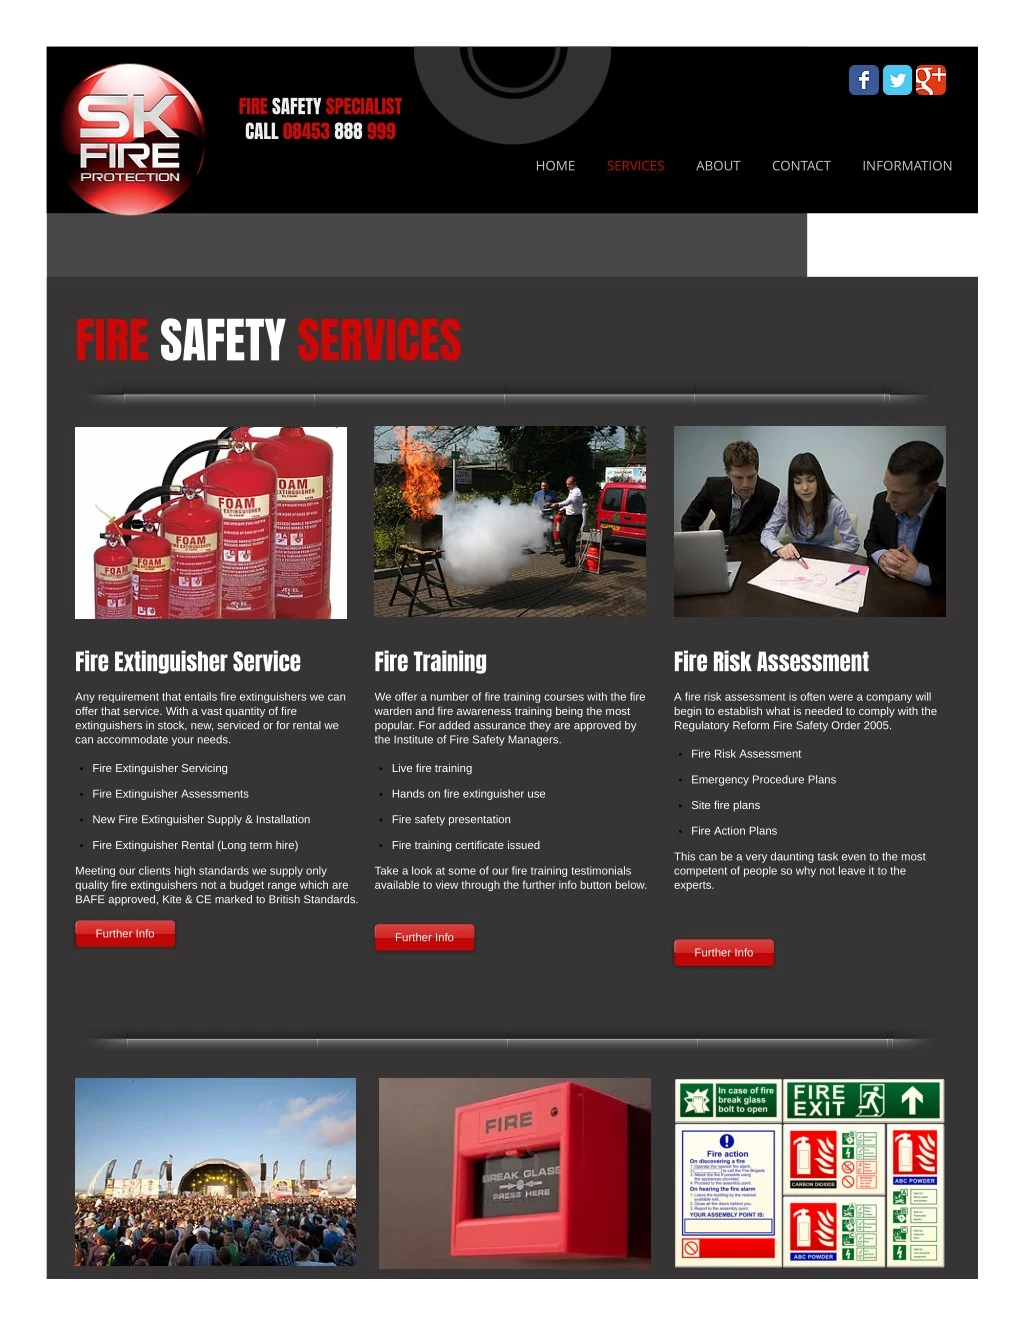 fire safety specialist call 08453 888 999